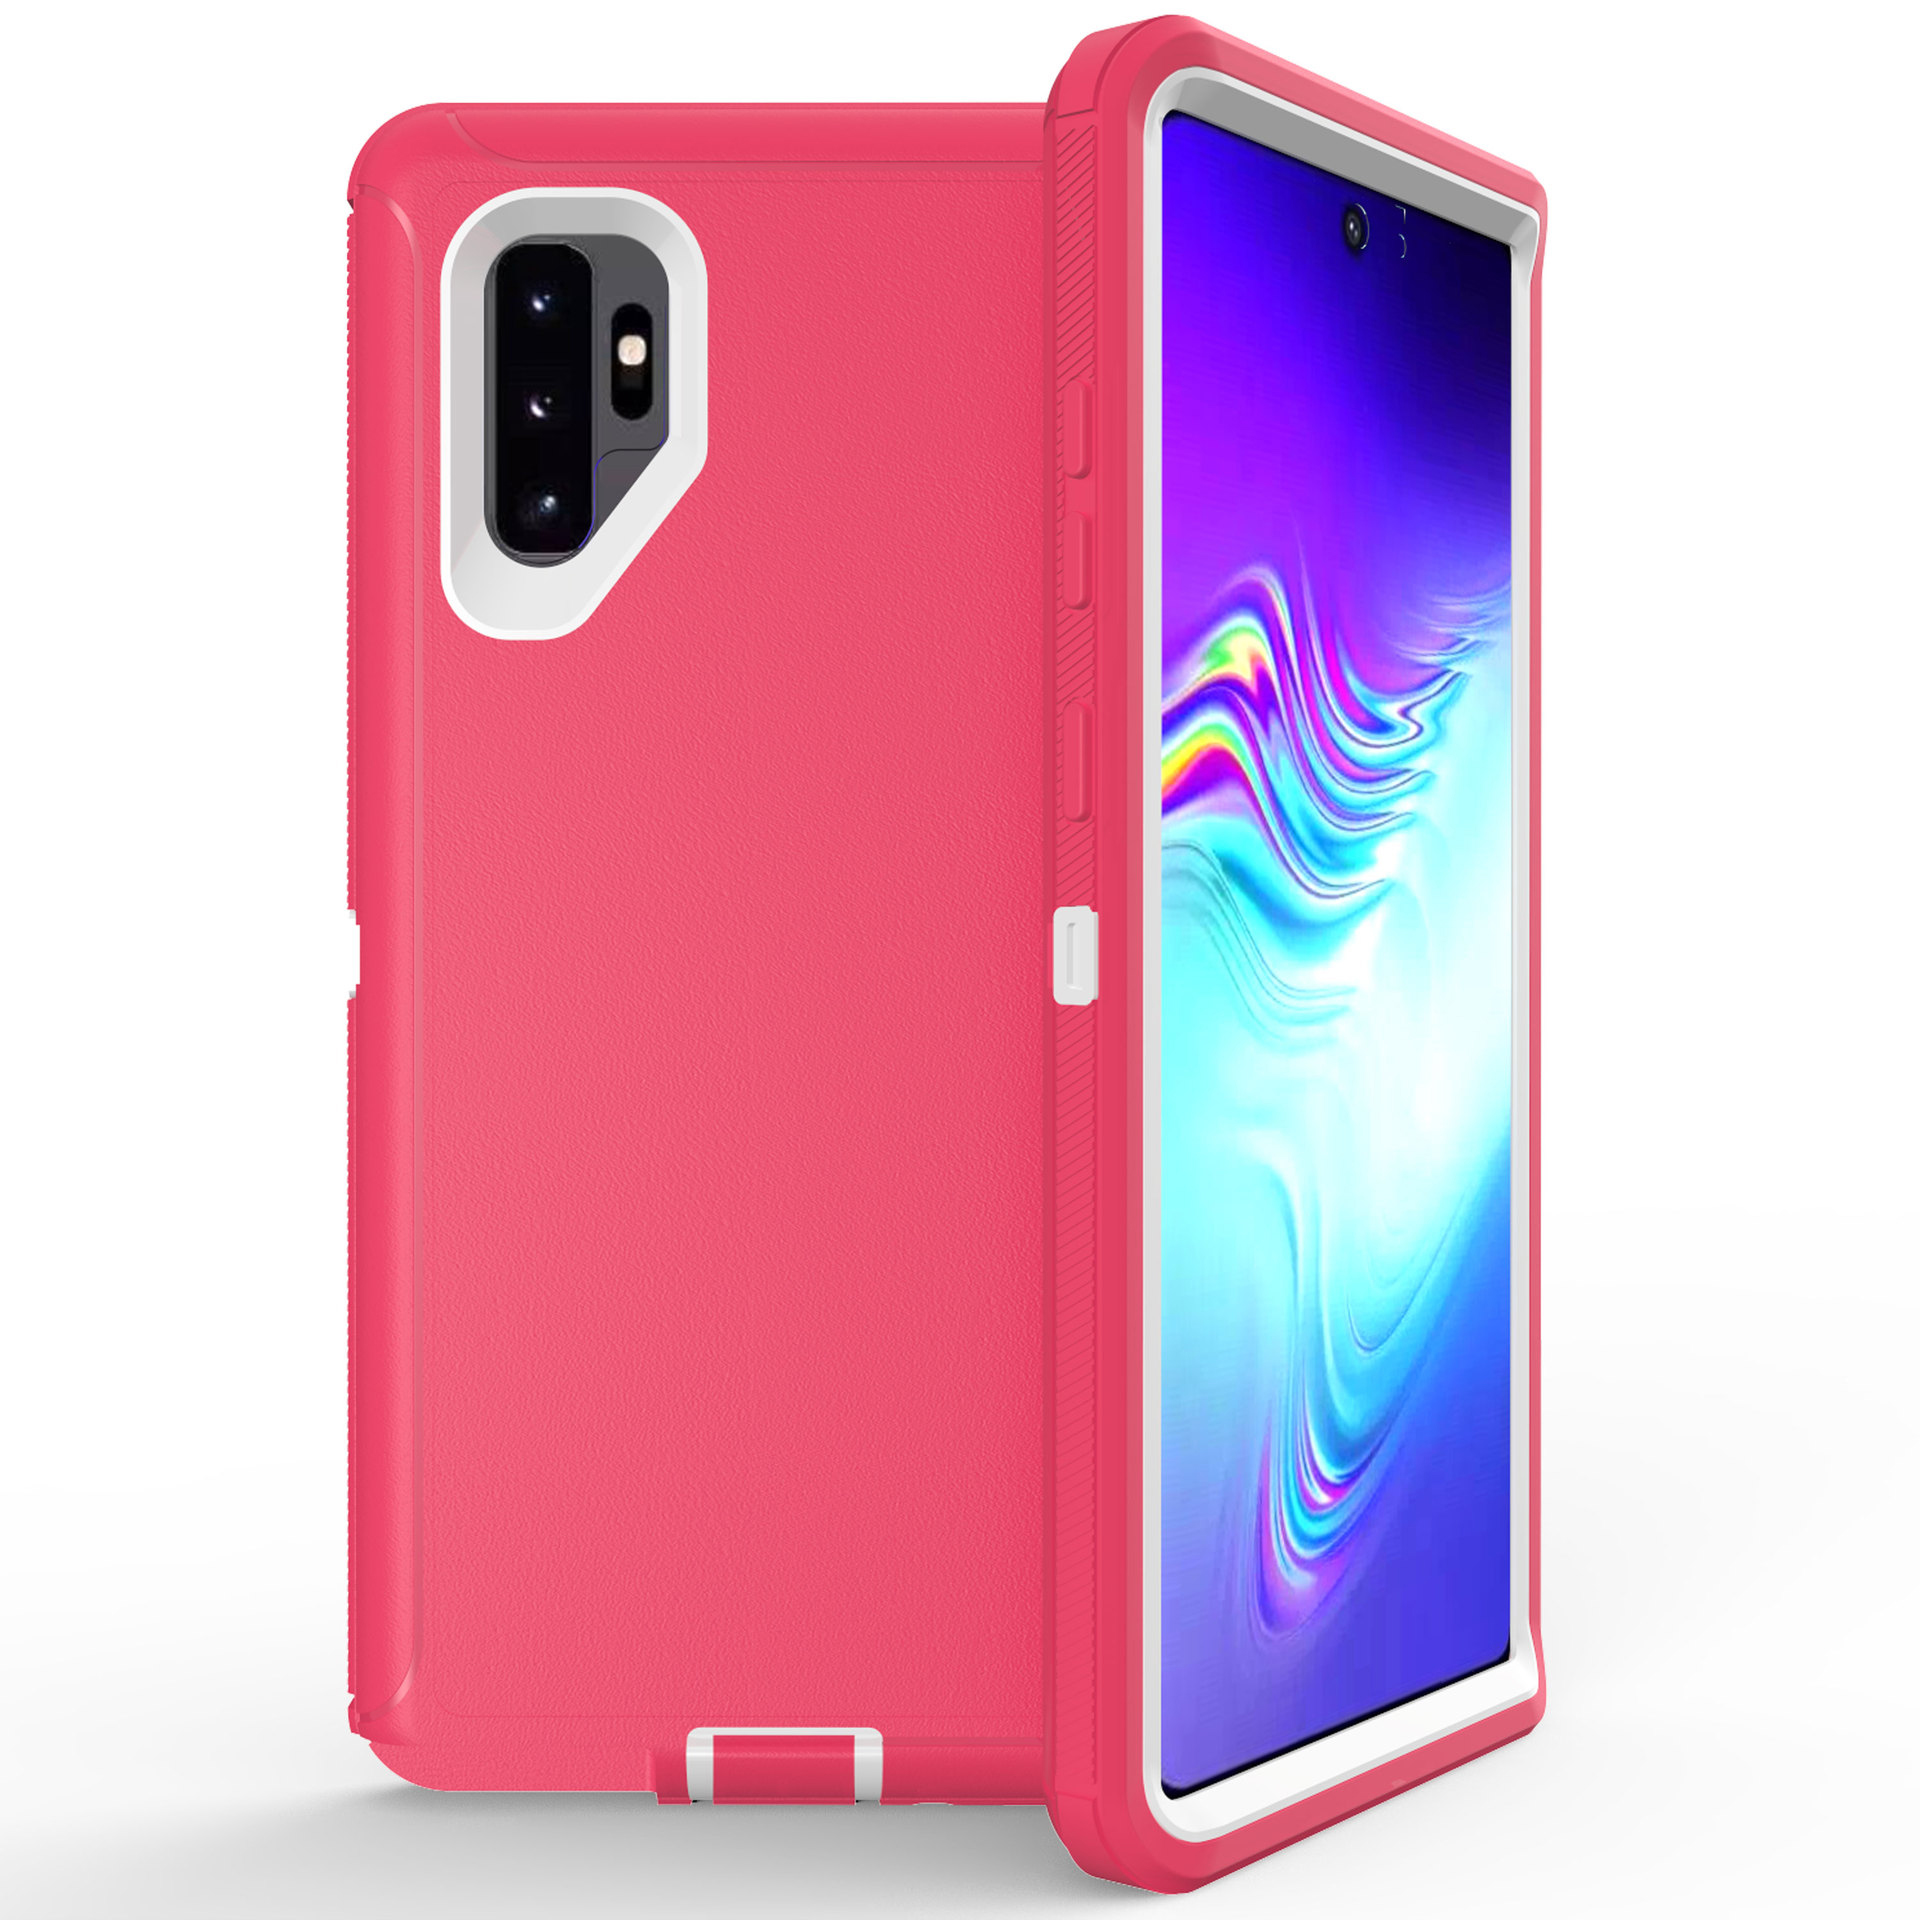 Galaxy Note 10+ (Plus) Armor Robot Case (Hot Pink White)